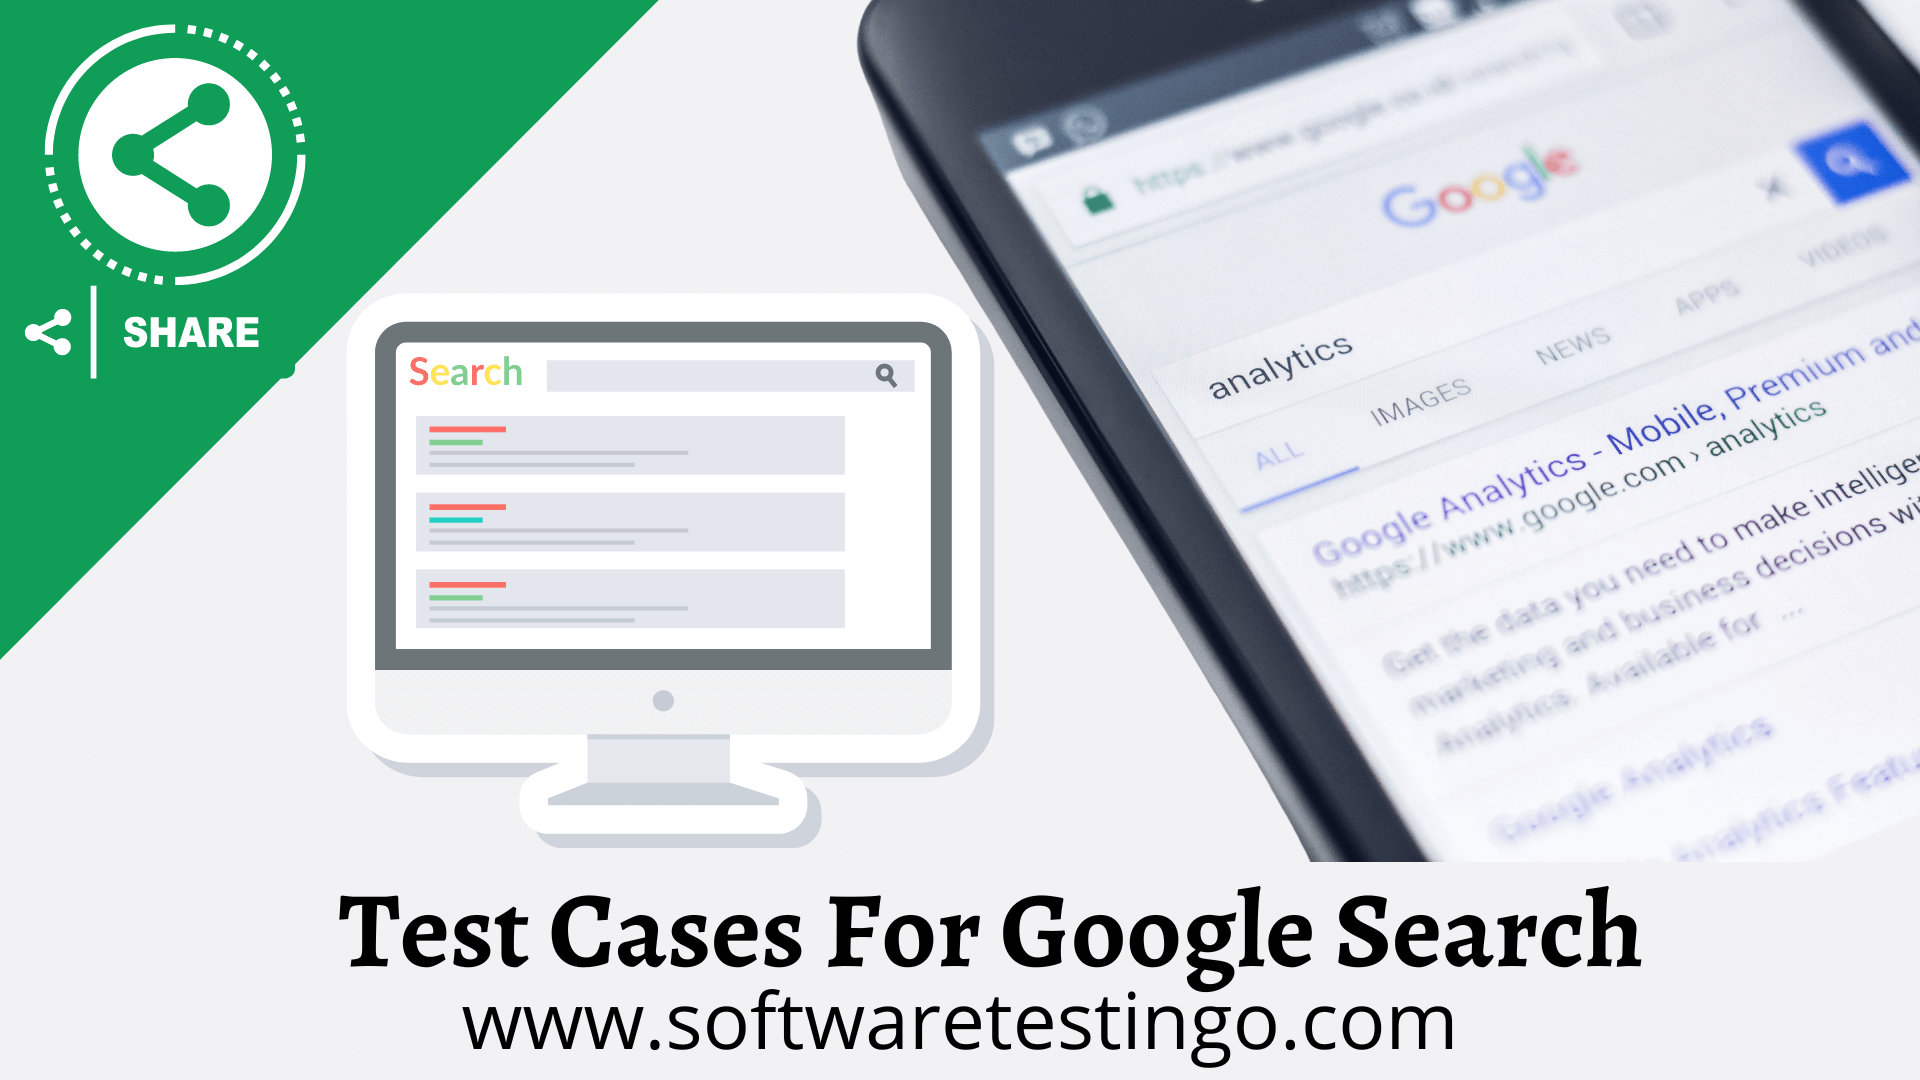 Google Search Test Cases